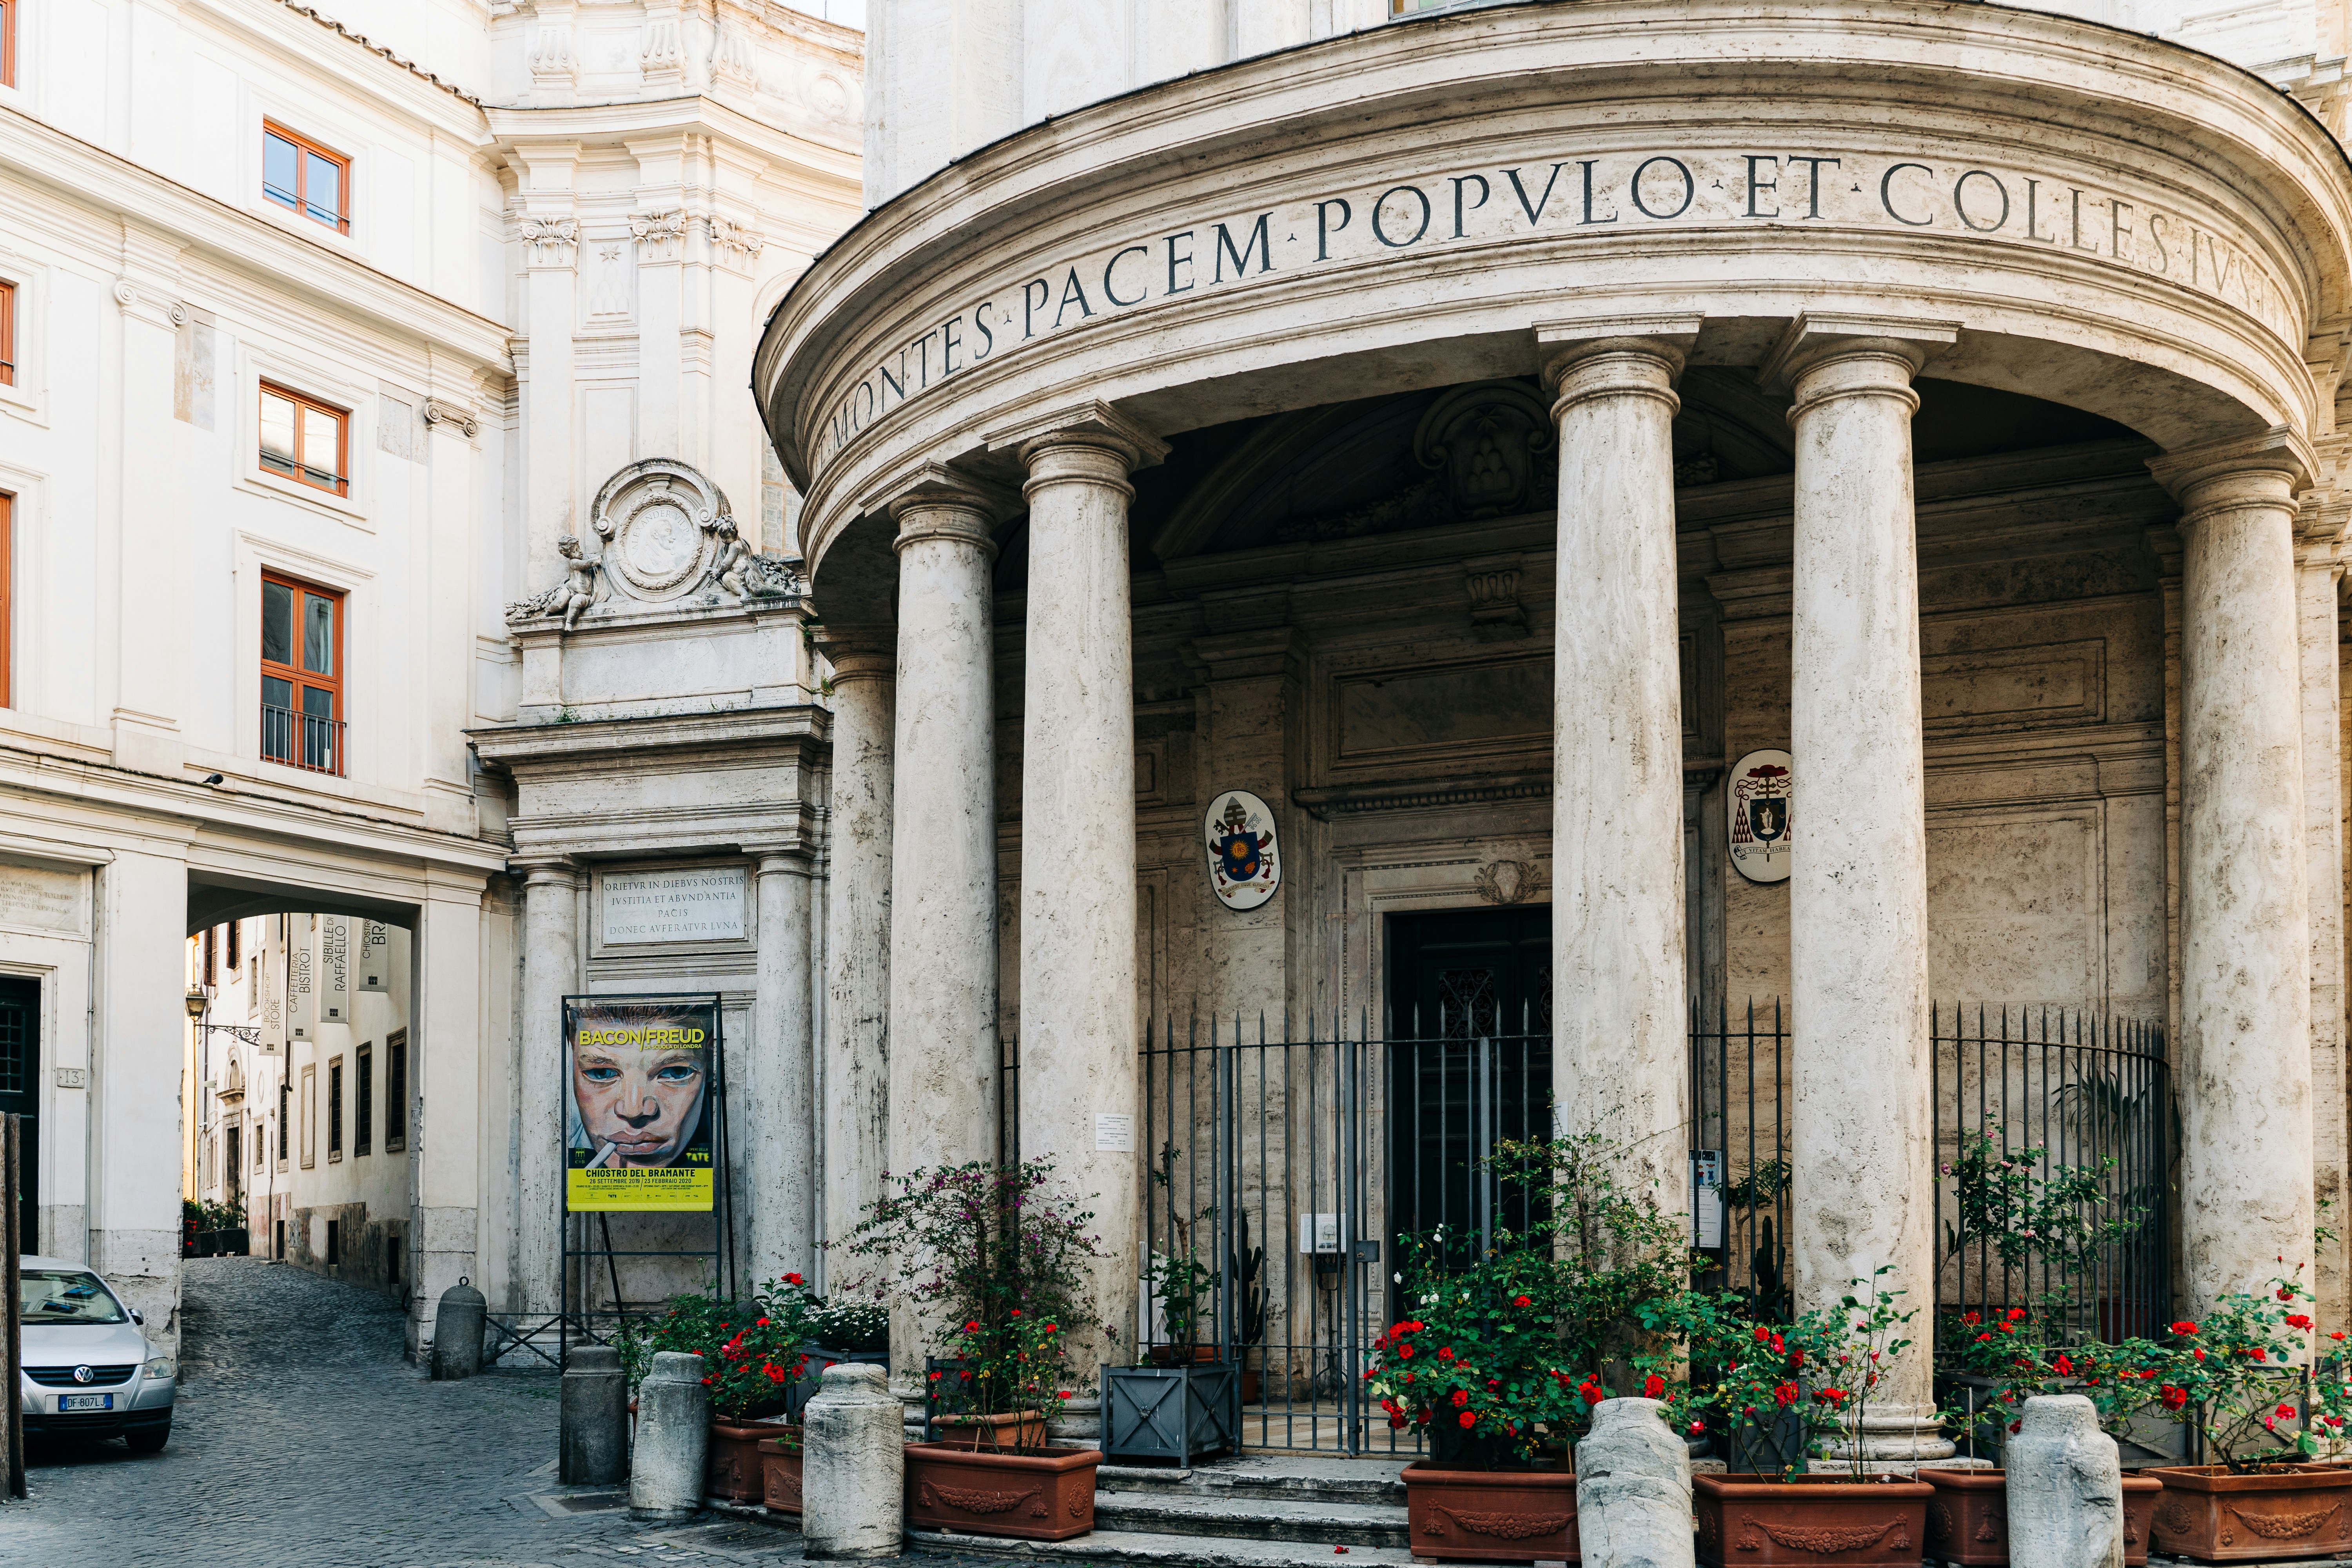 The entrance to the Chiostro del Bramante exhibition space in Rome, Italy